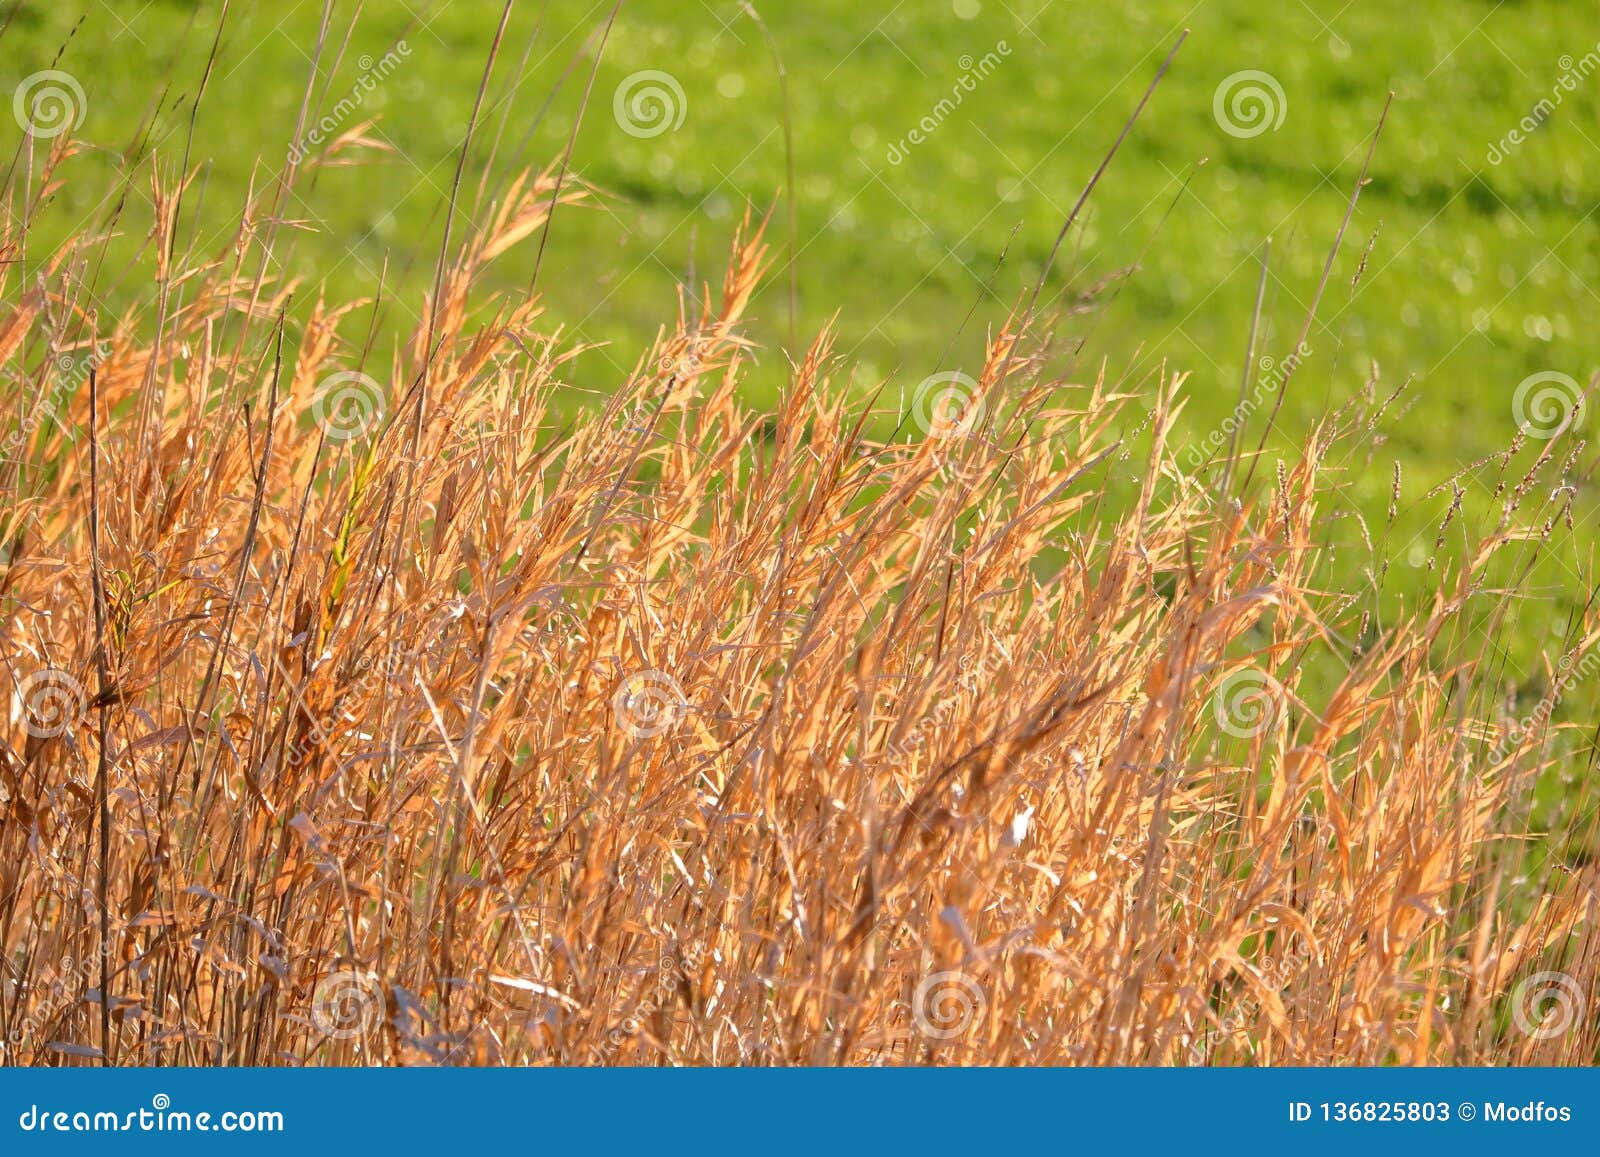 Golden, Sunlit Blades Of Dry Grass And Field Stock Image - Image of